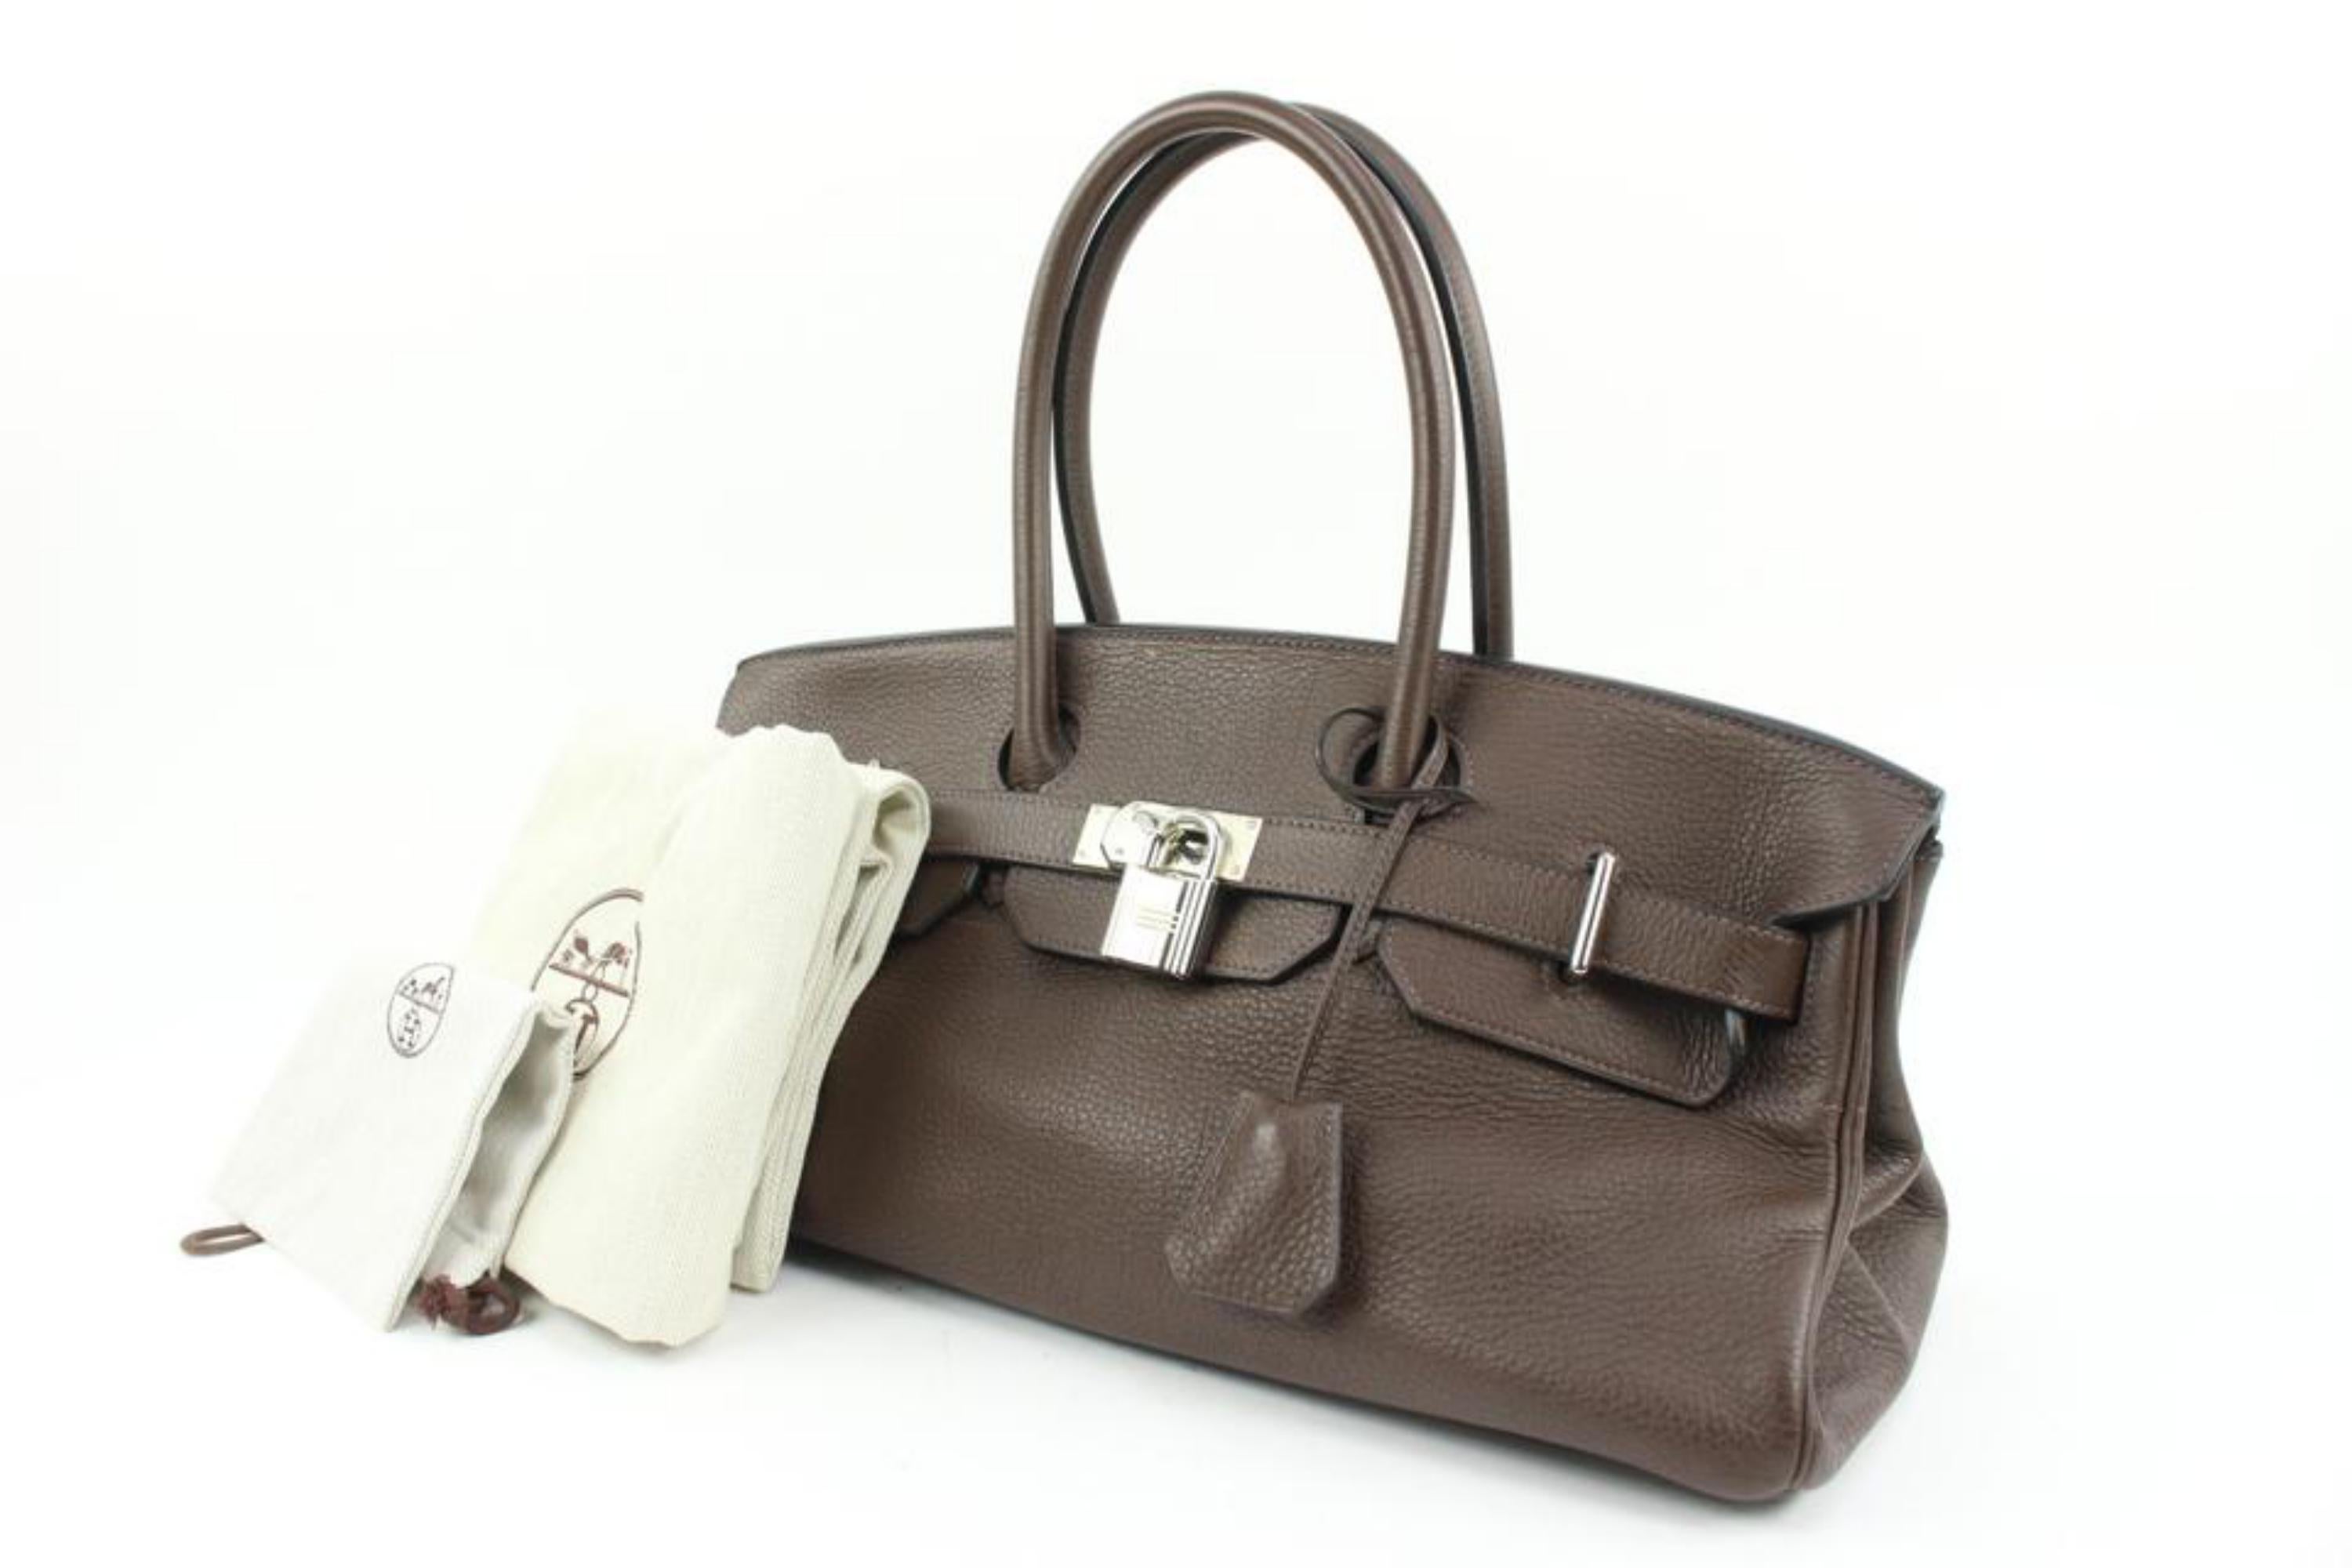 Hermès Brown Chocolat Clemence Leather JPG Birkin Bag s210h50
Date Code/Serial Number: K in a Square
Made In: France
Measurements: Length:  16.5